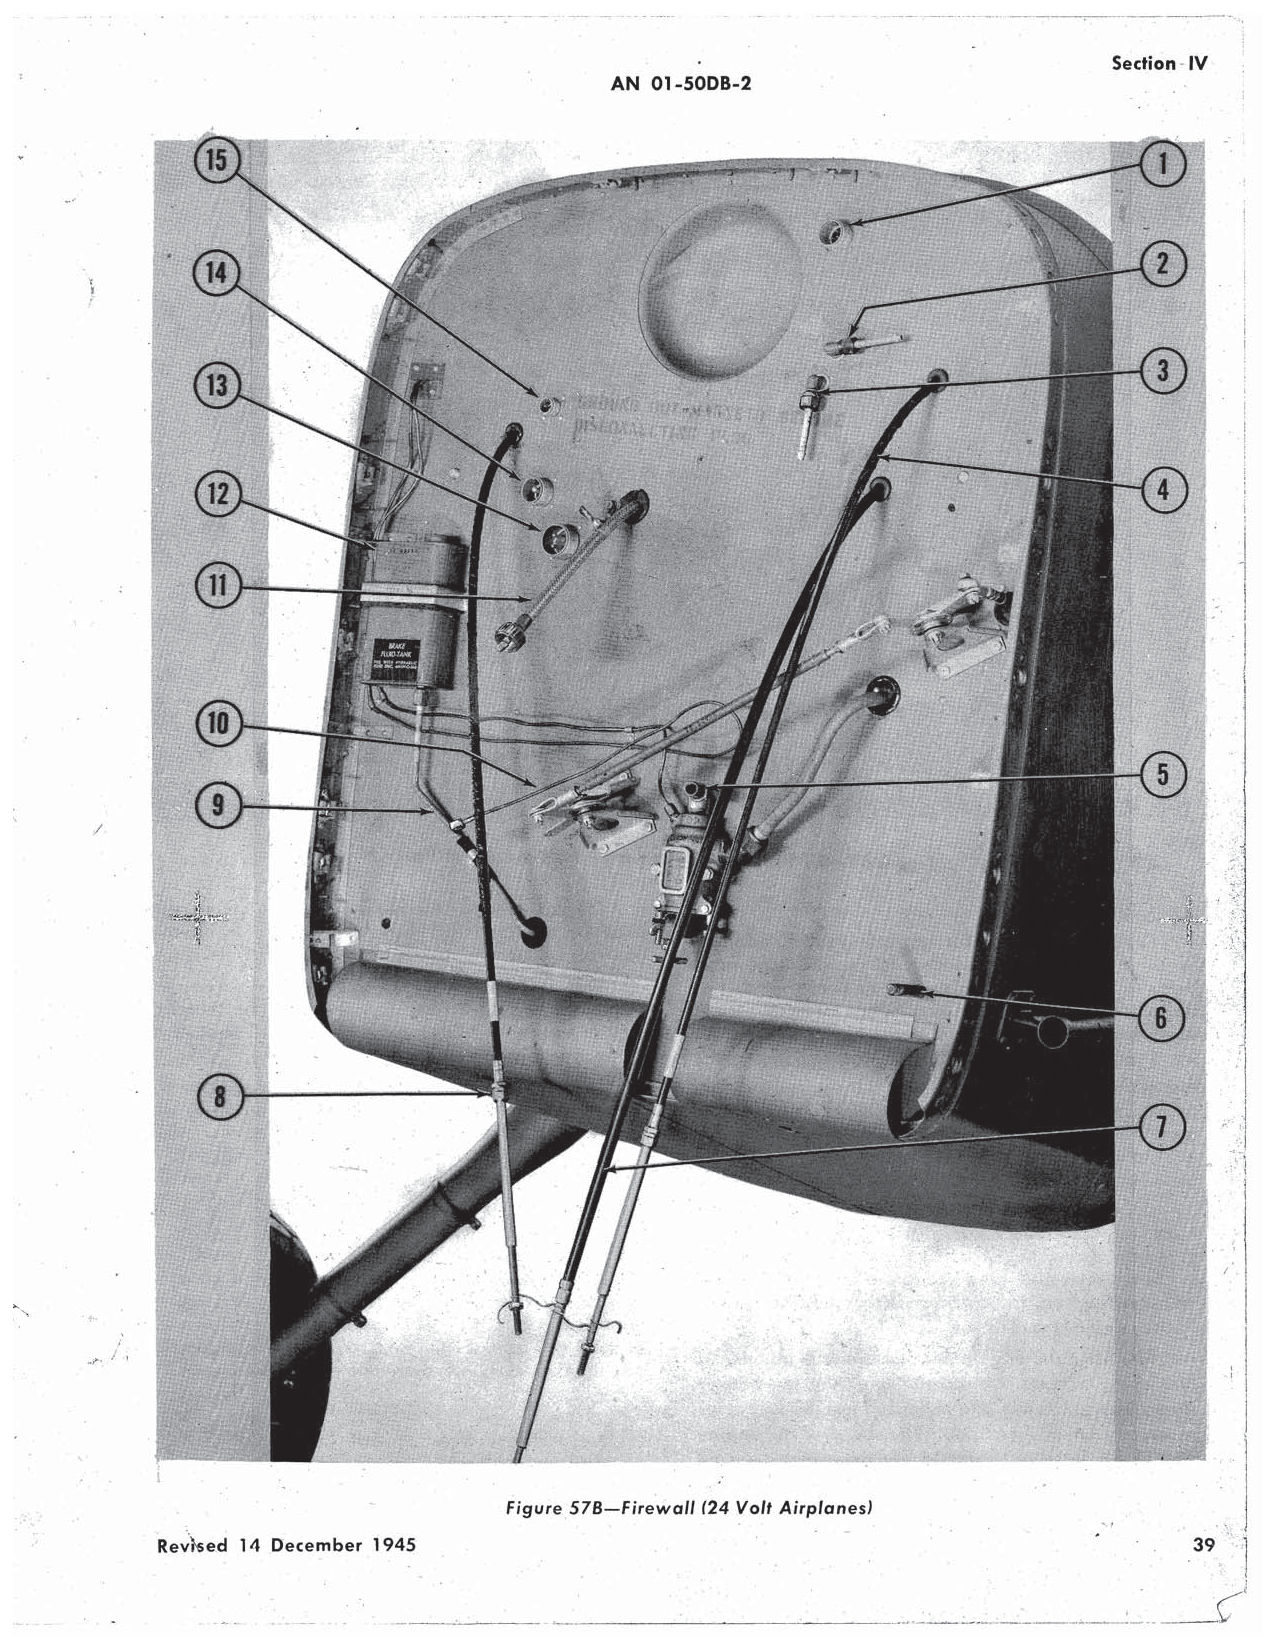 Sample page 52 from AirCorps Library document: Maintenance Instructions - L-5 & OY-1, OY-2